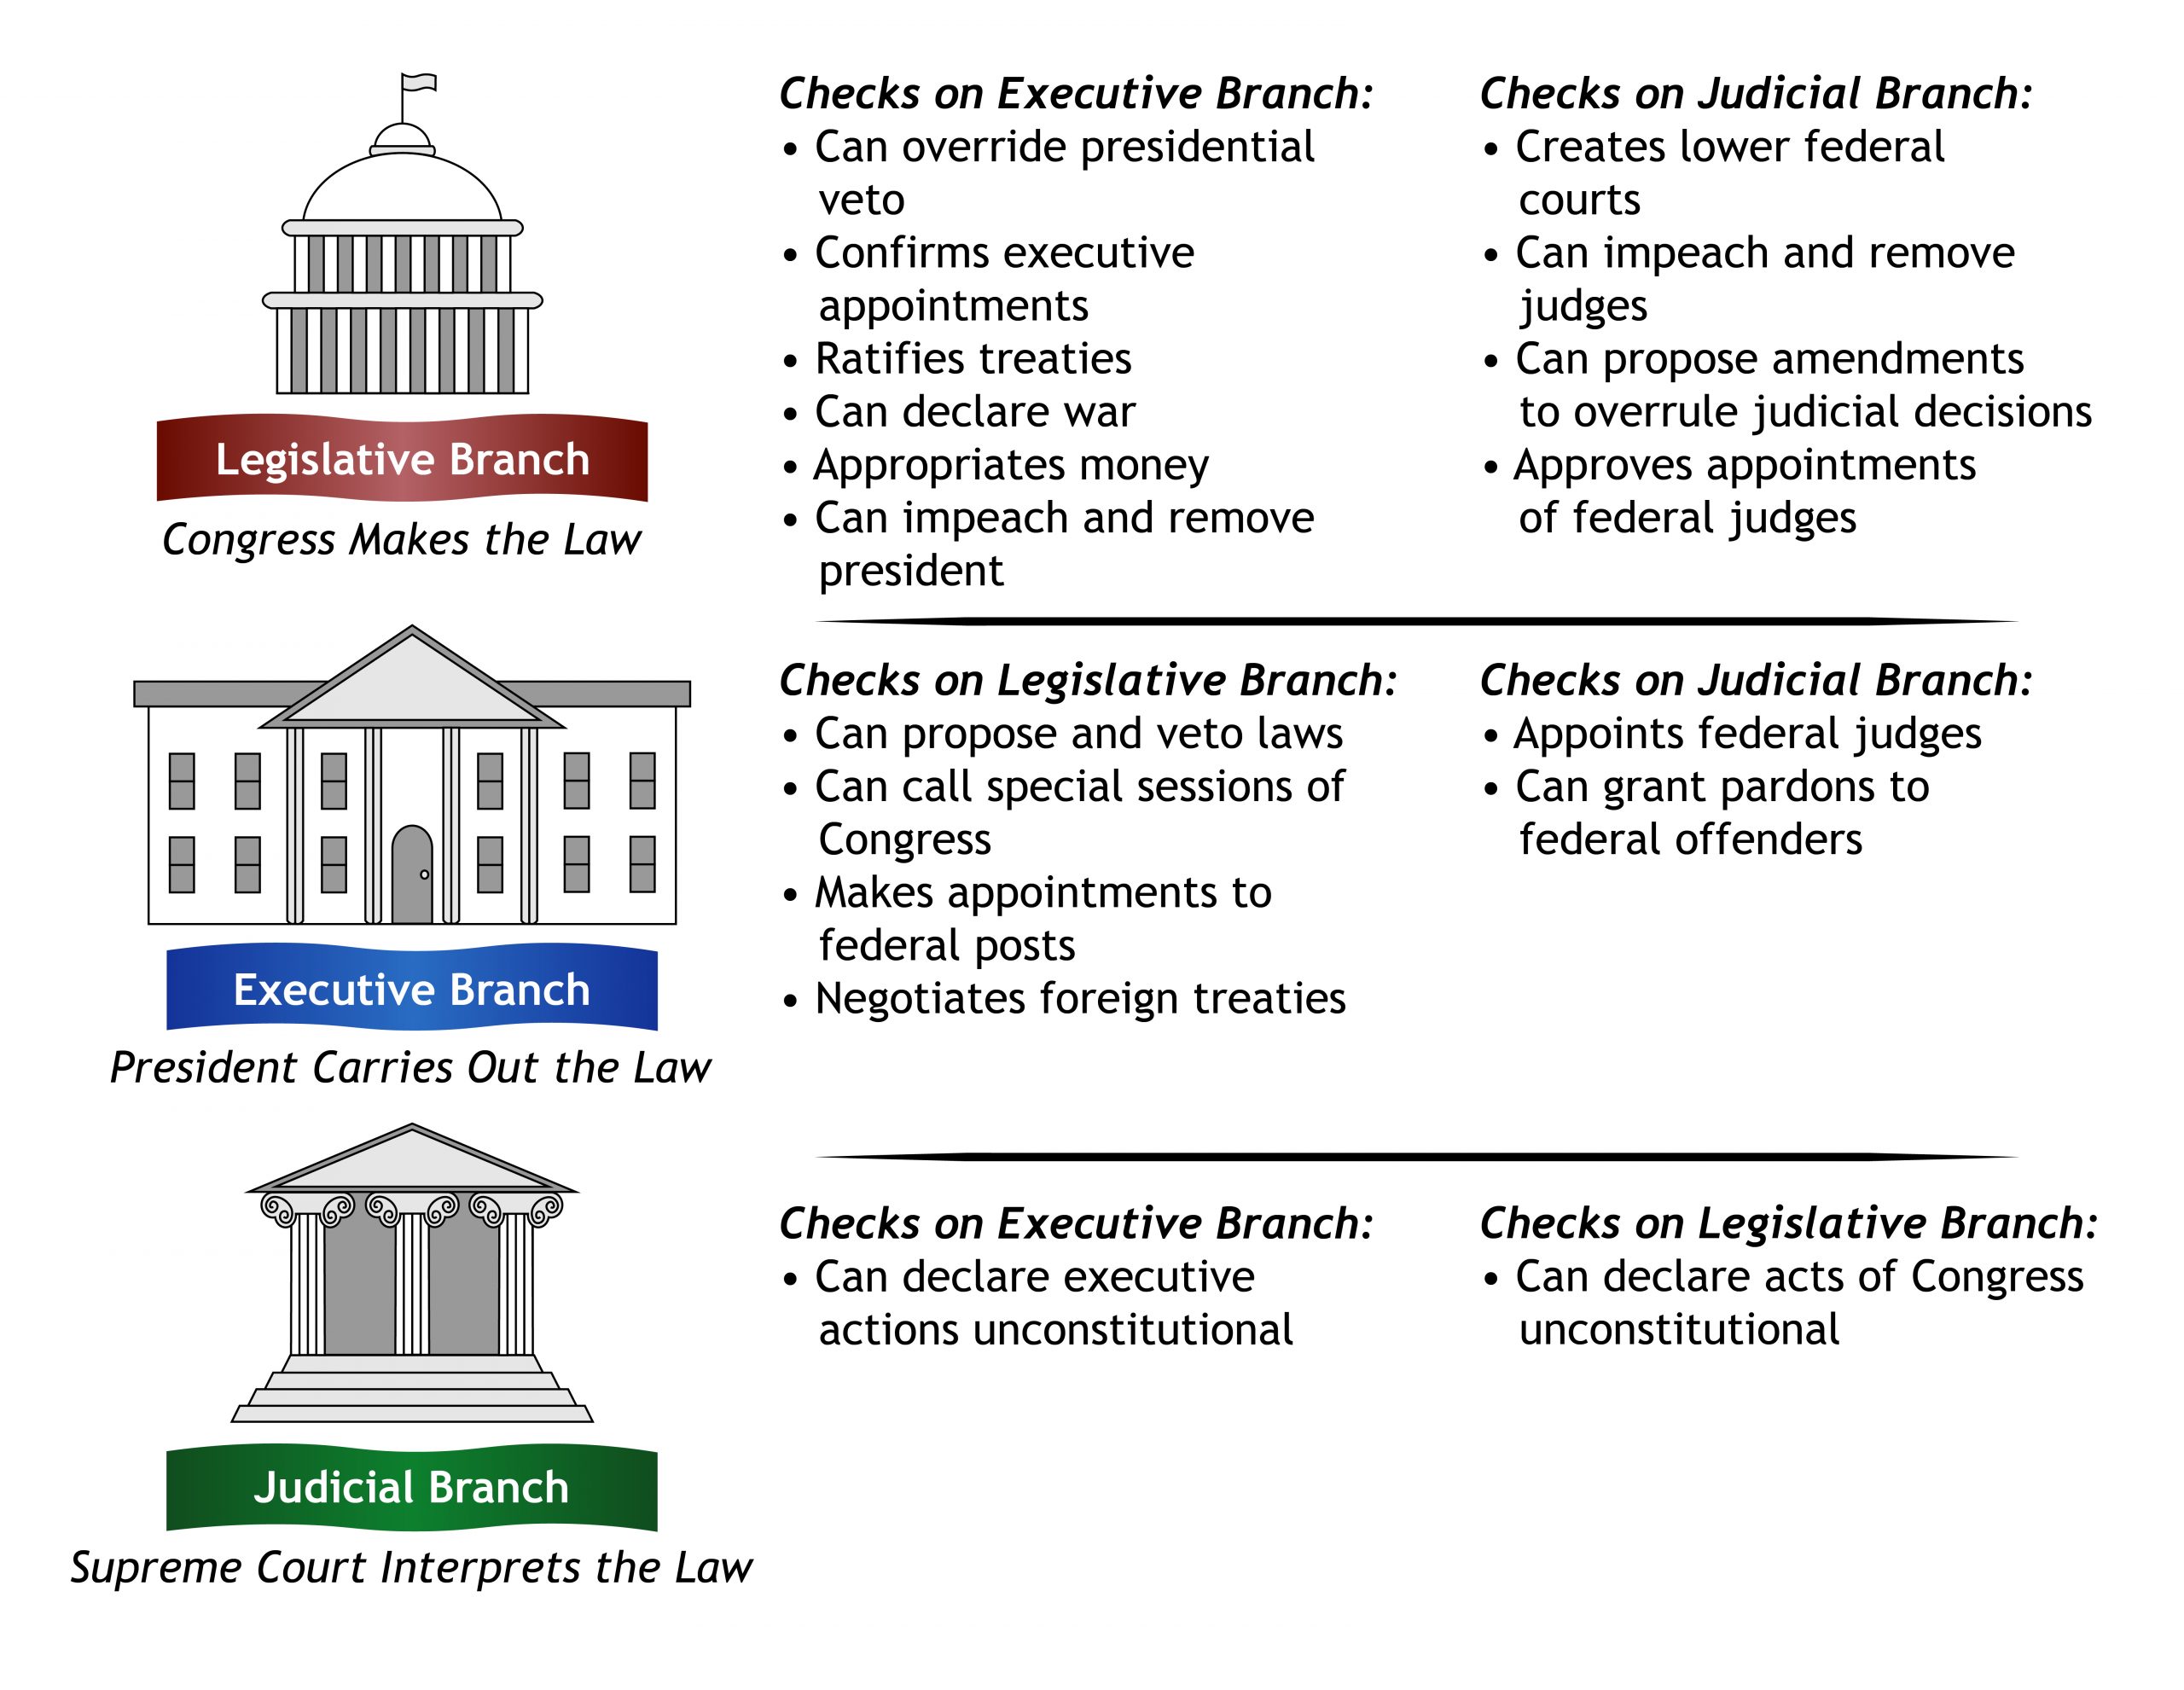 Chart showing the checks and balances of each branch of government over the other branches